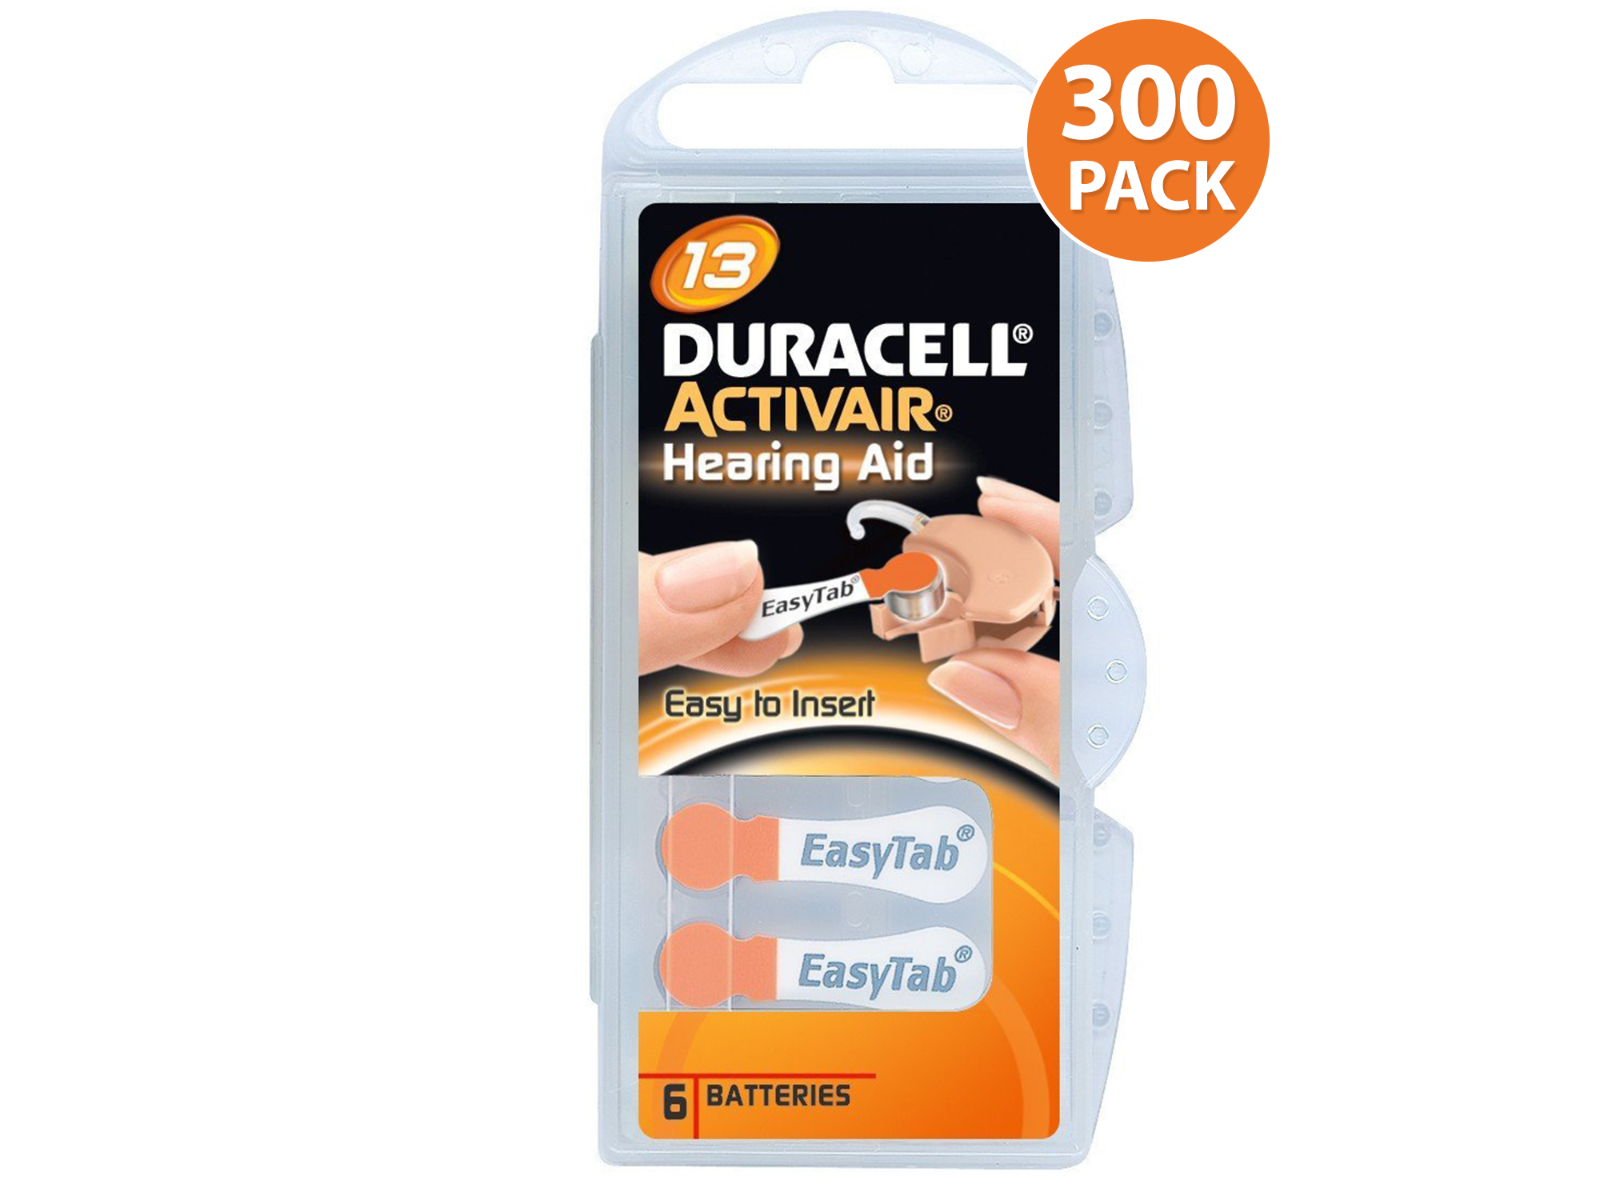 Duracell Hearing Aid Battery Size 13 (300 Pcs)